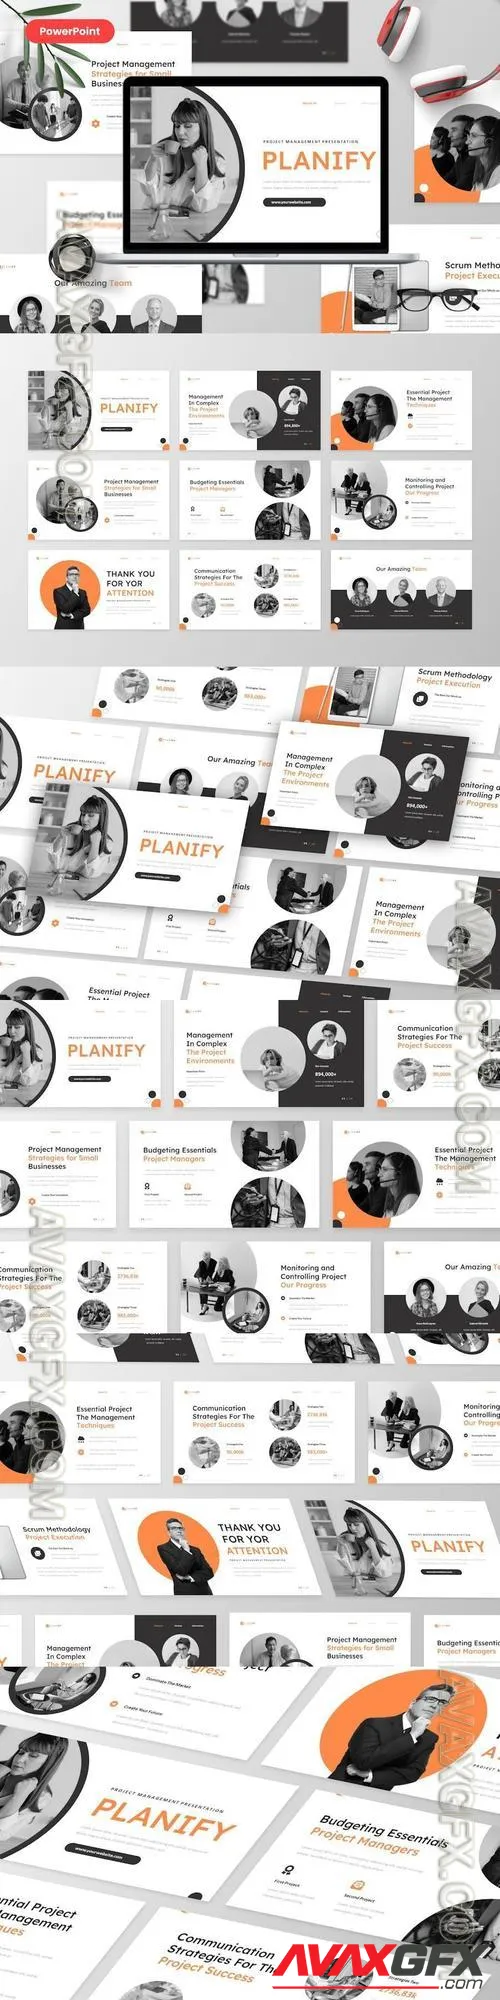 PLANIFY - Project Management PowerPoint Template